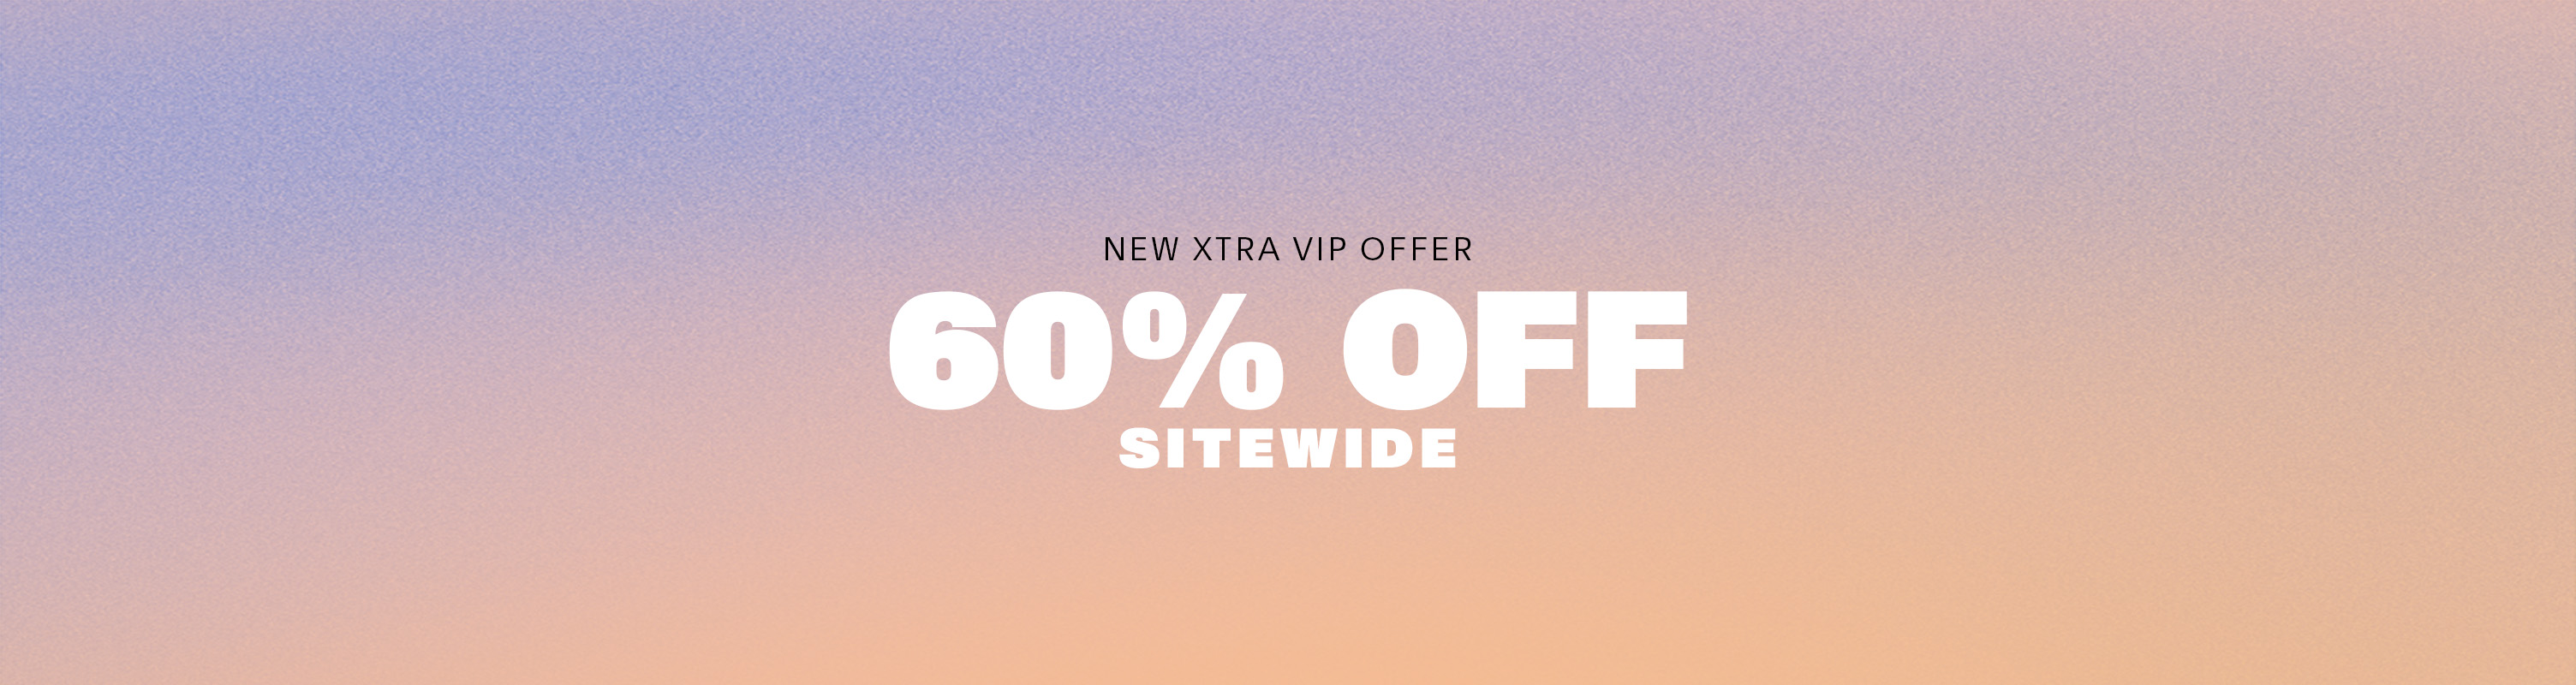 Happy National Lingerie Day! Here's 60% OFF. - Savage X Fenty